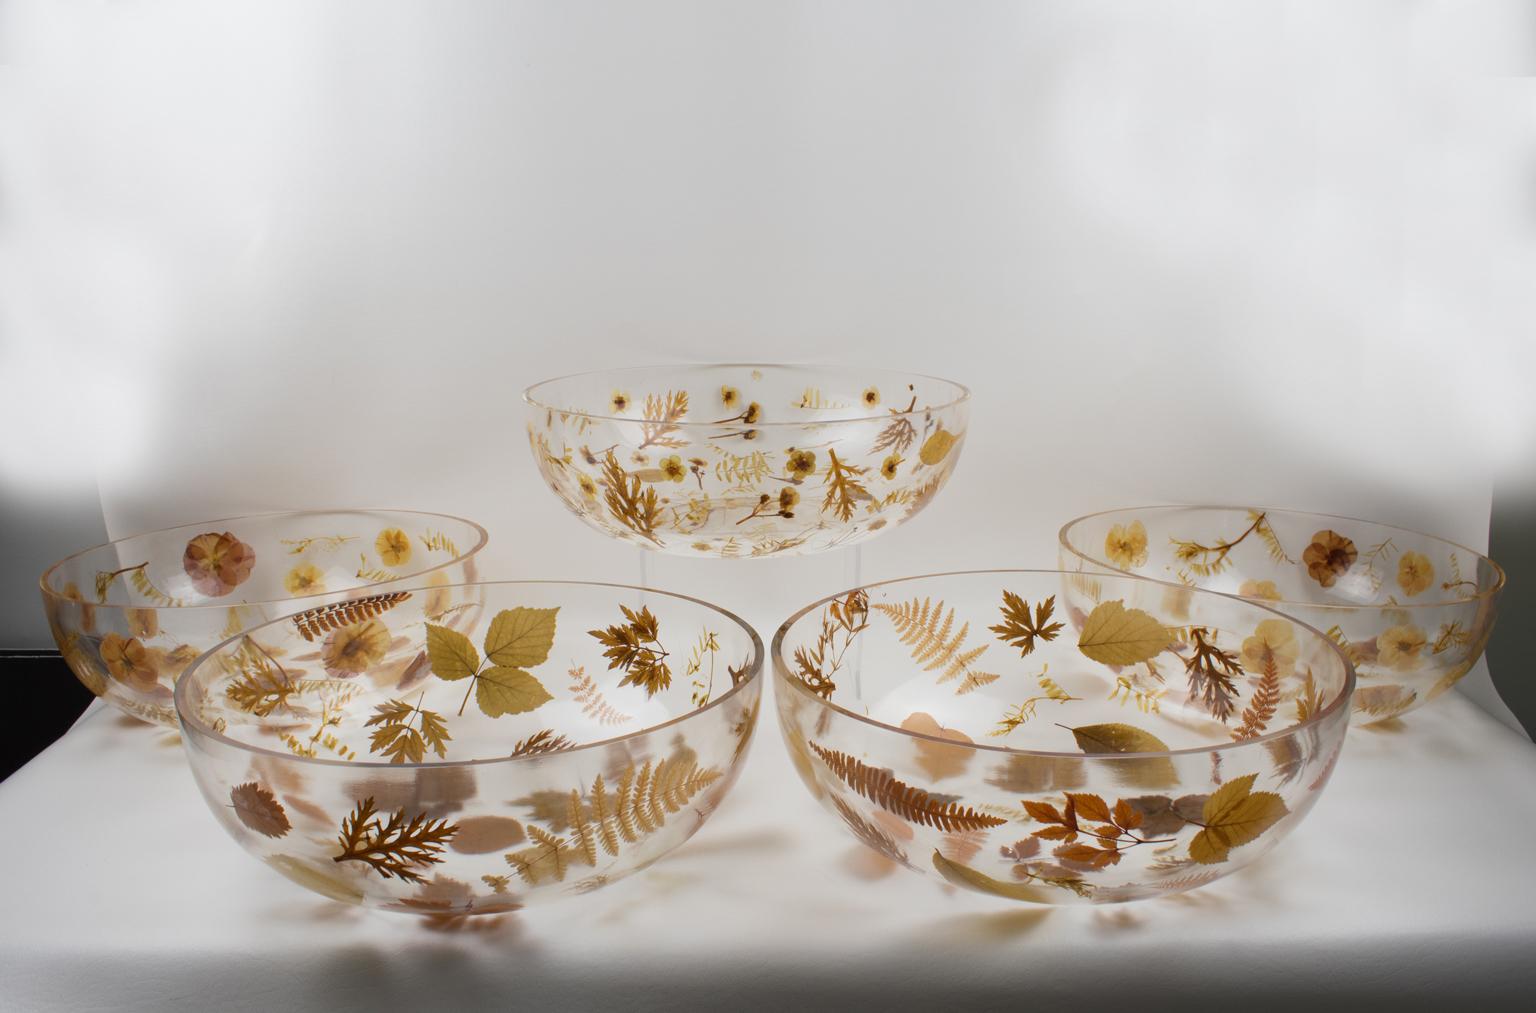 1970s Italian Resin Bowl Centerpiece with Leaves and Flowers Inclusions 2